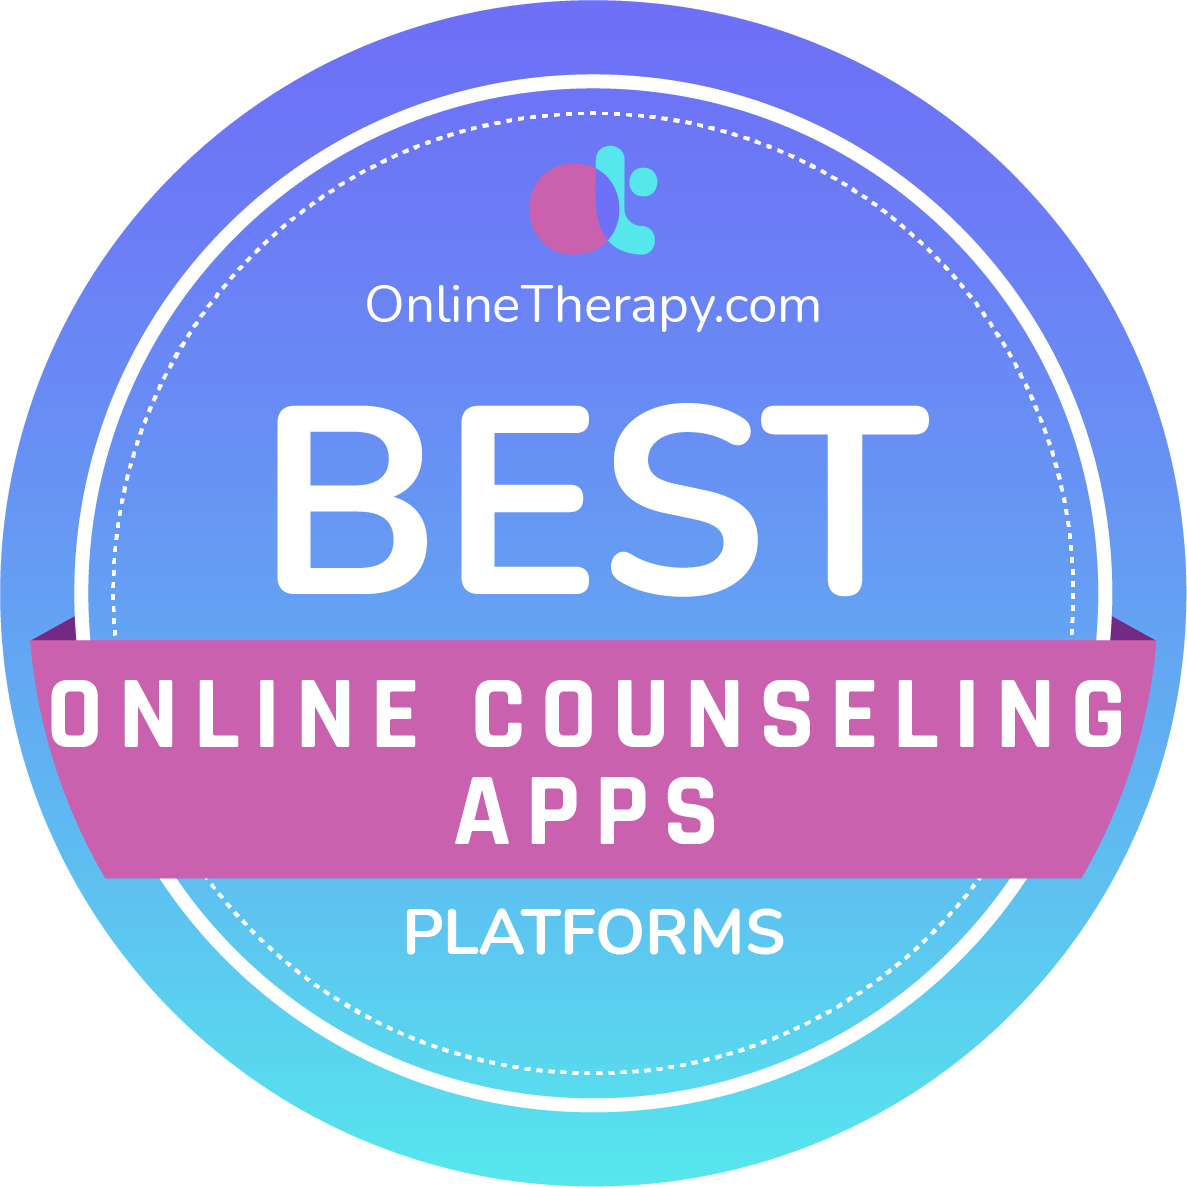 Online Counseling Apps Badge